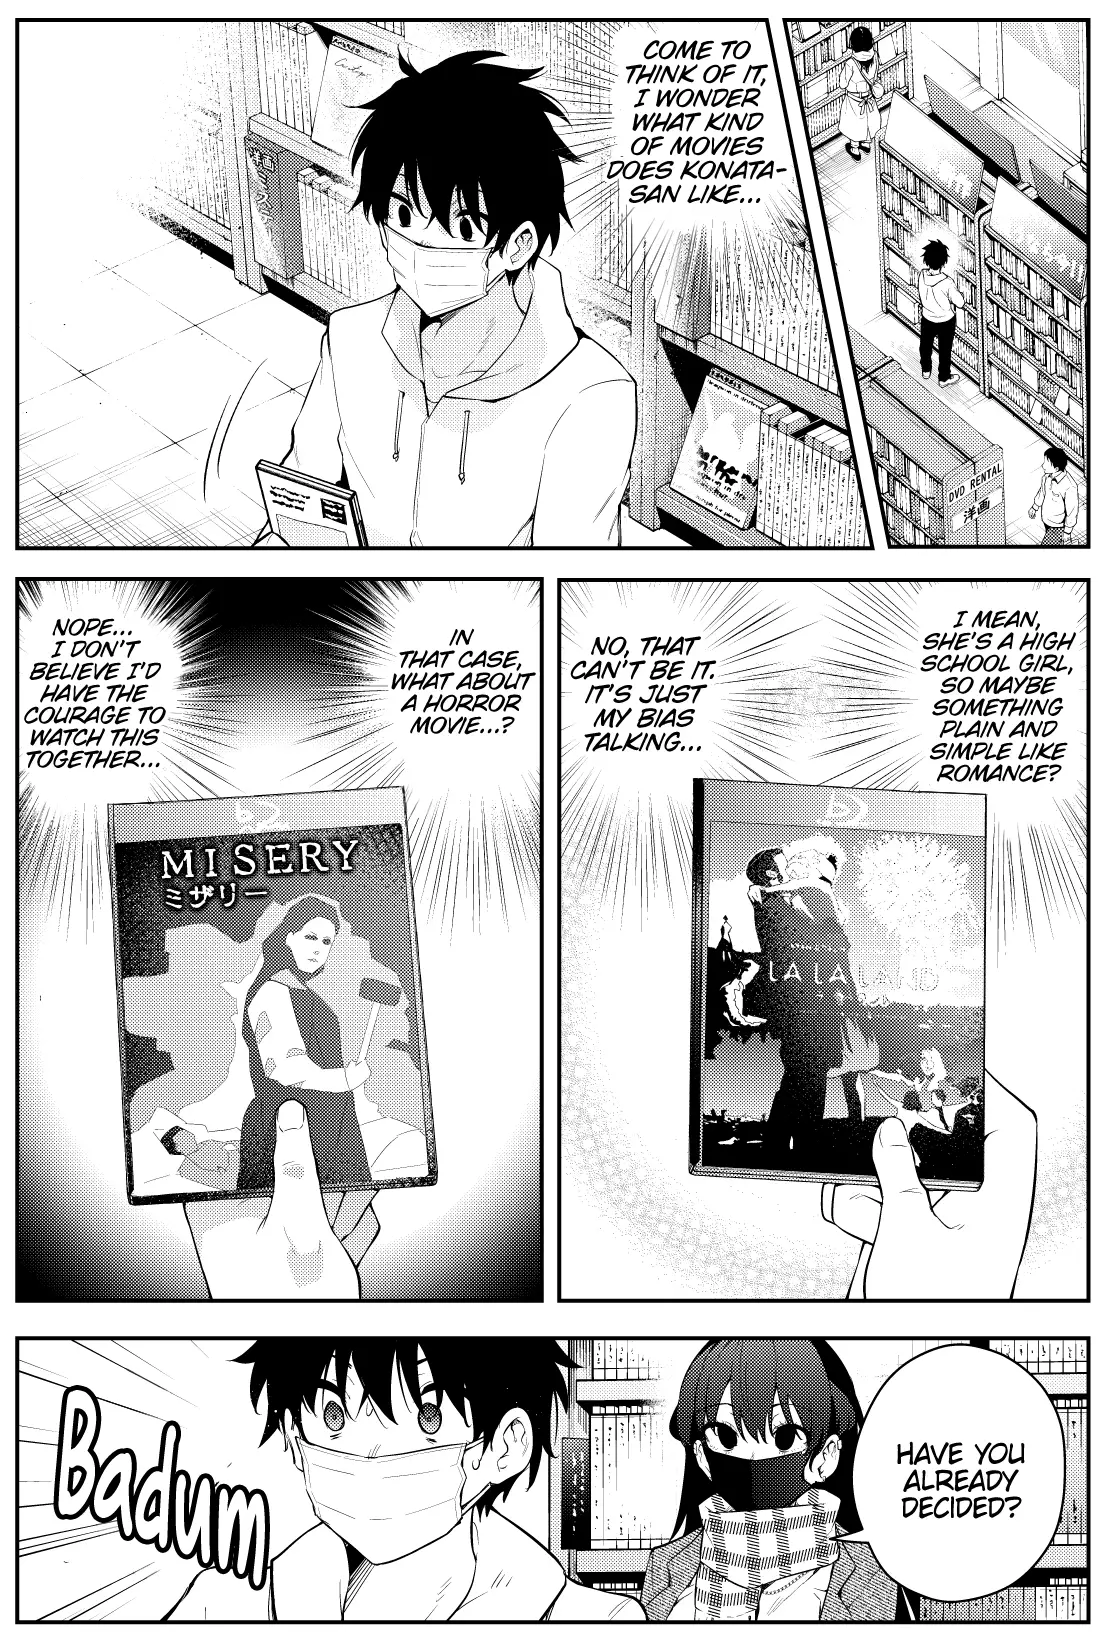 The Story Of A Manga Artist Confined By A Strange High School Girl - 36 page 2-17d48604